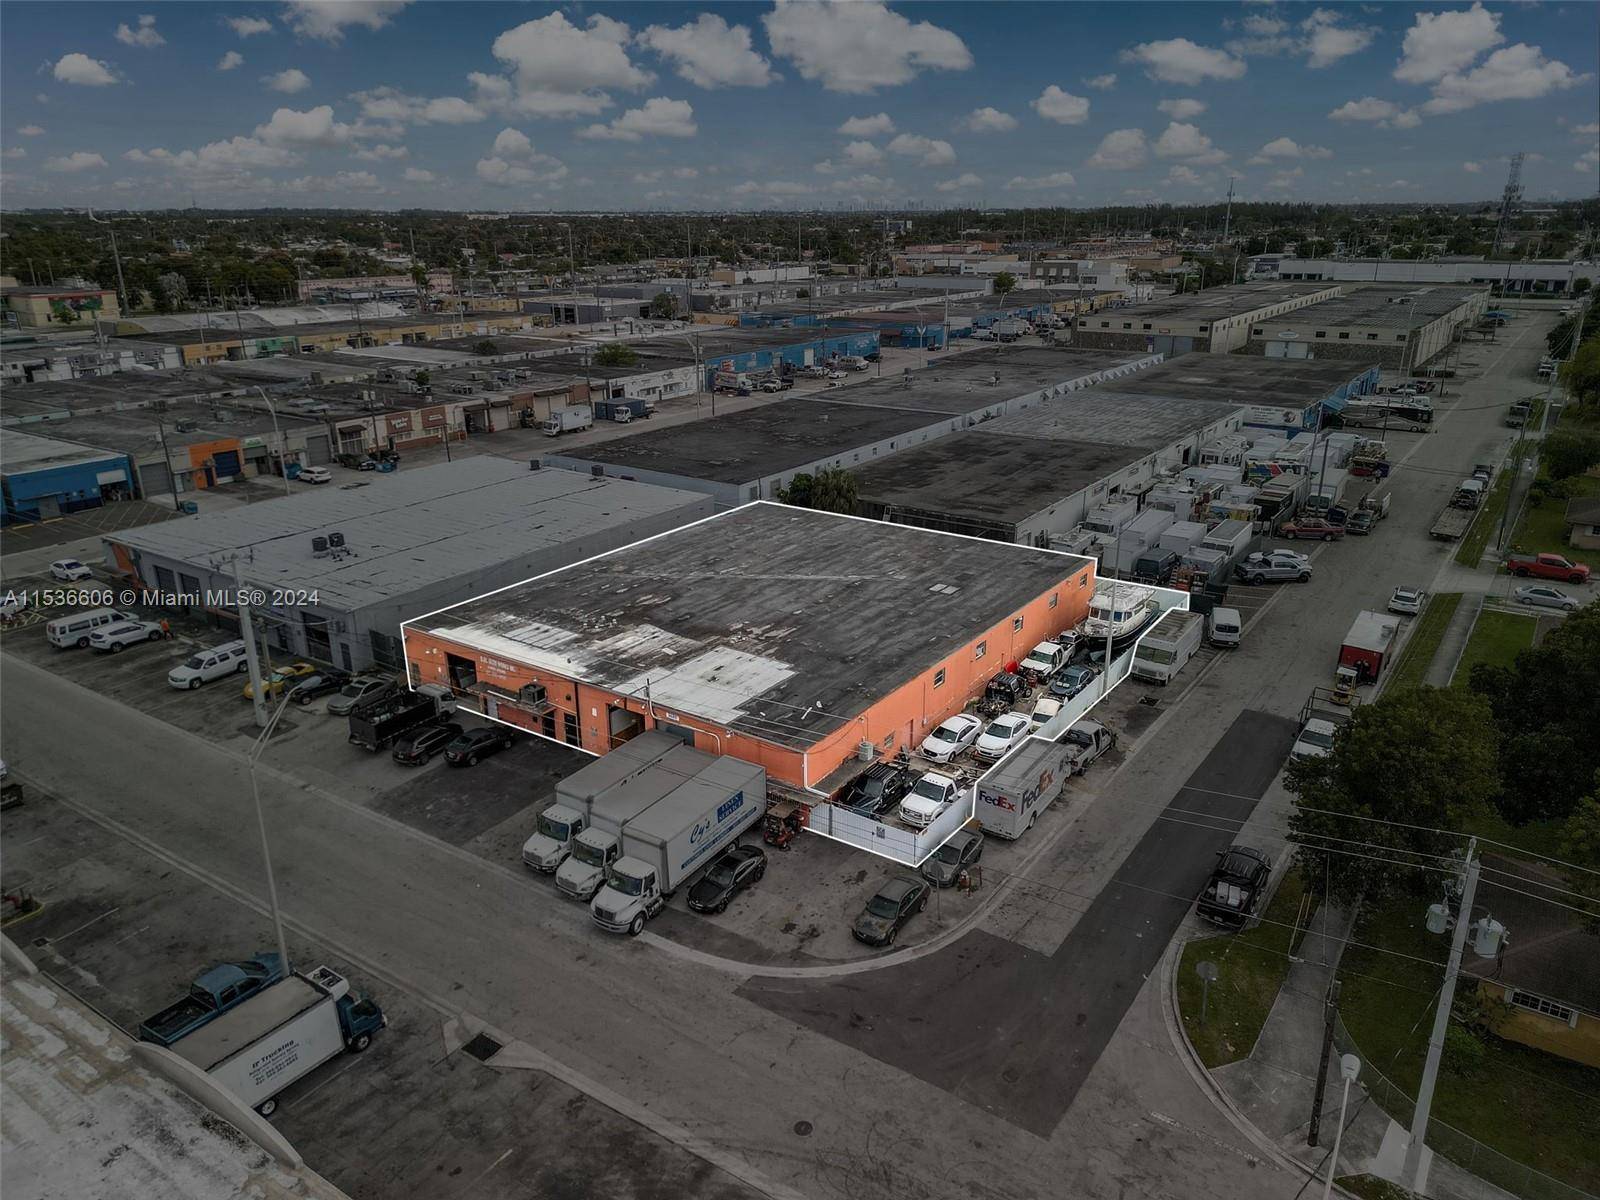 CHECK OUT THIS 14, 000 SQ FT 3 BAY WAREHOUSE THAT SITS ON 20, 000 SQ FT LOT.